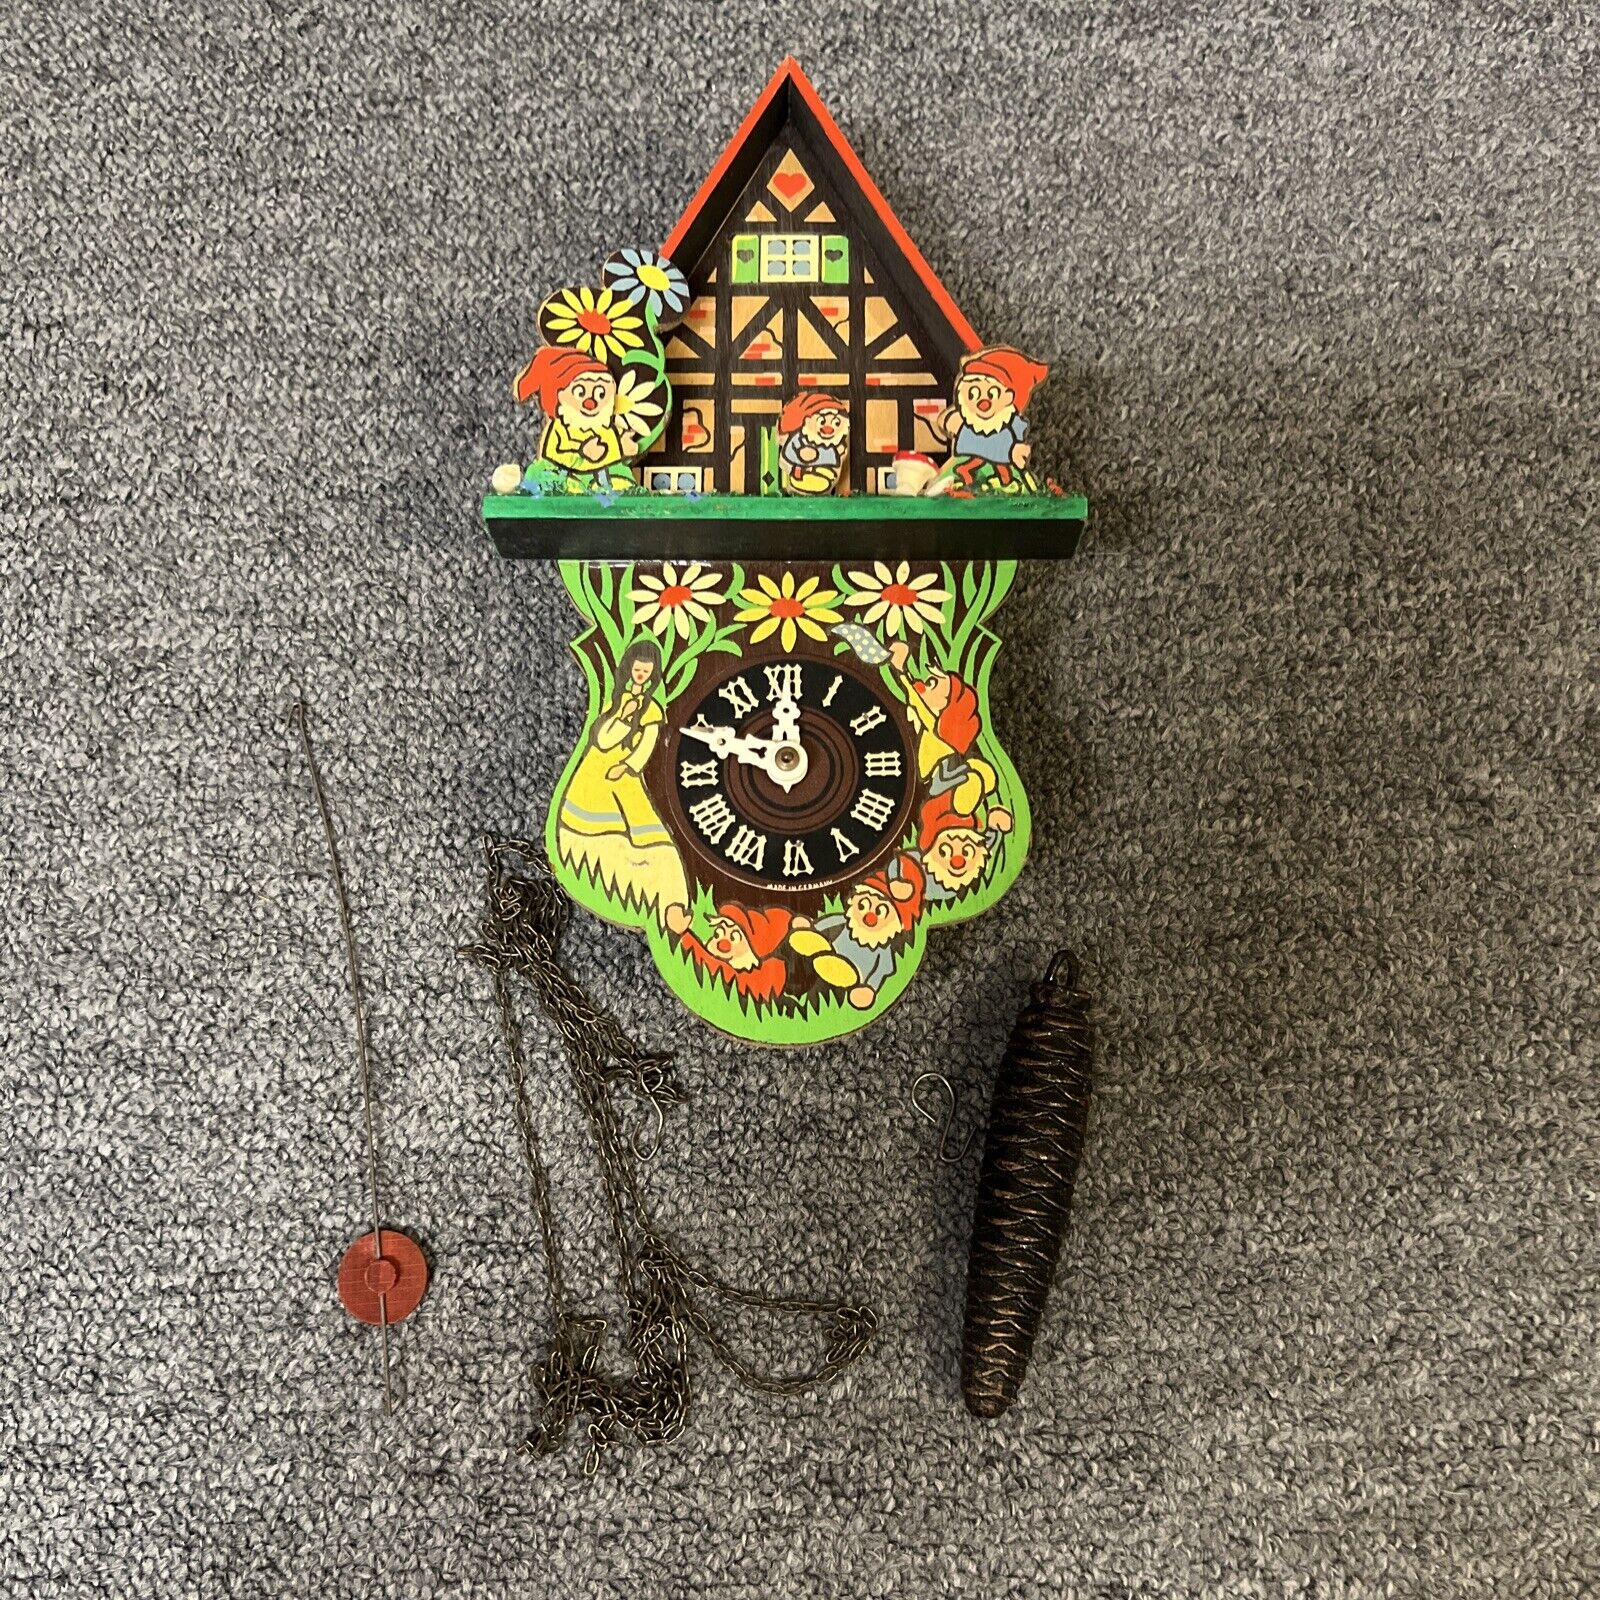 ANTIQUE Cuckoo Clock Black Forest Gnomes Rare, Vintage, Made in Western Germany